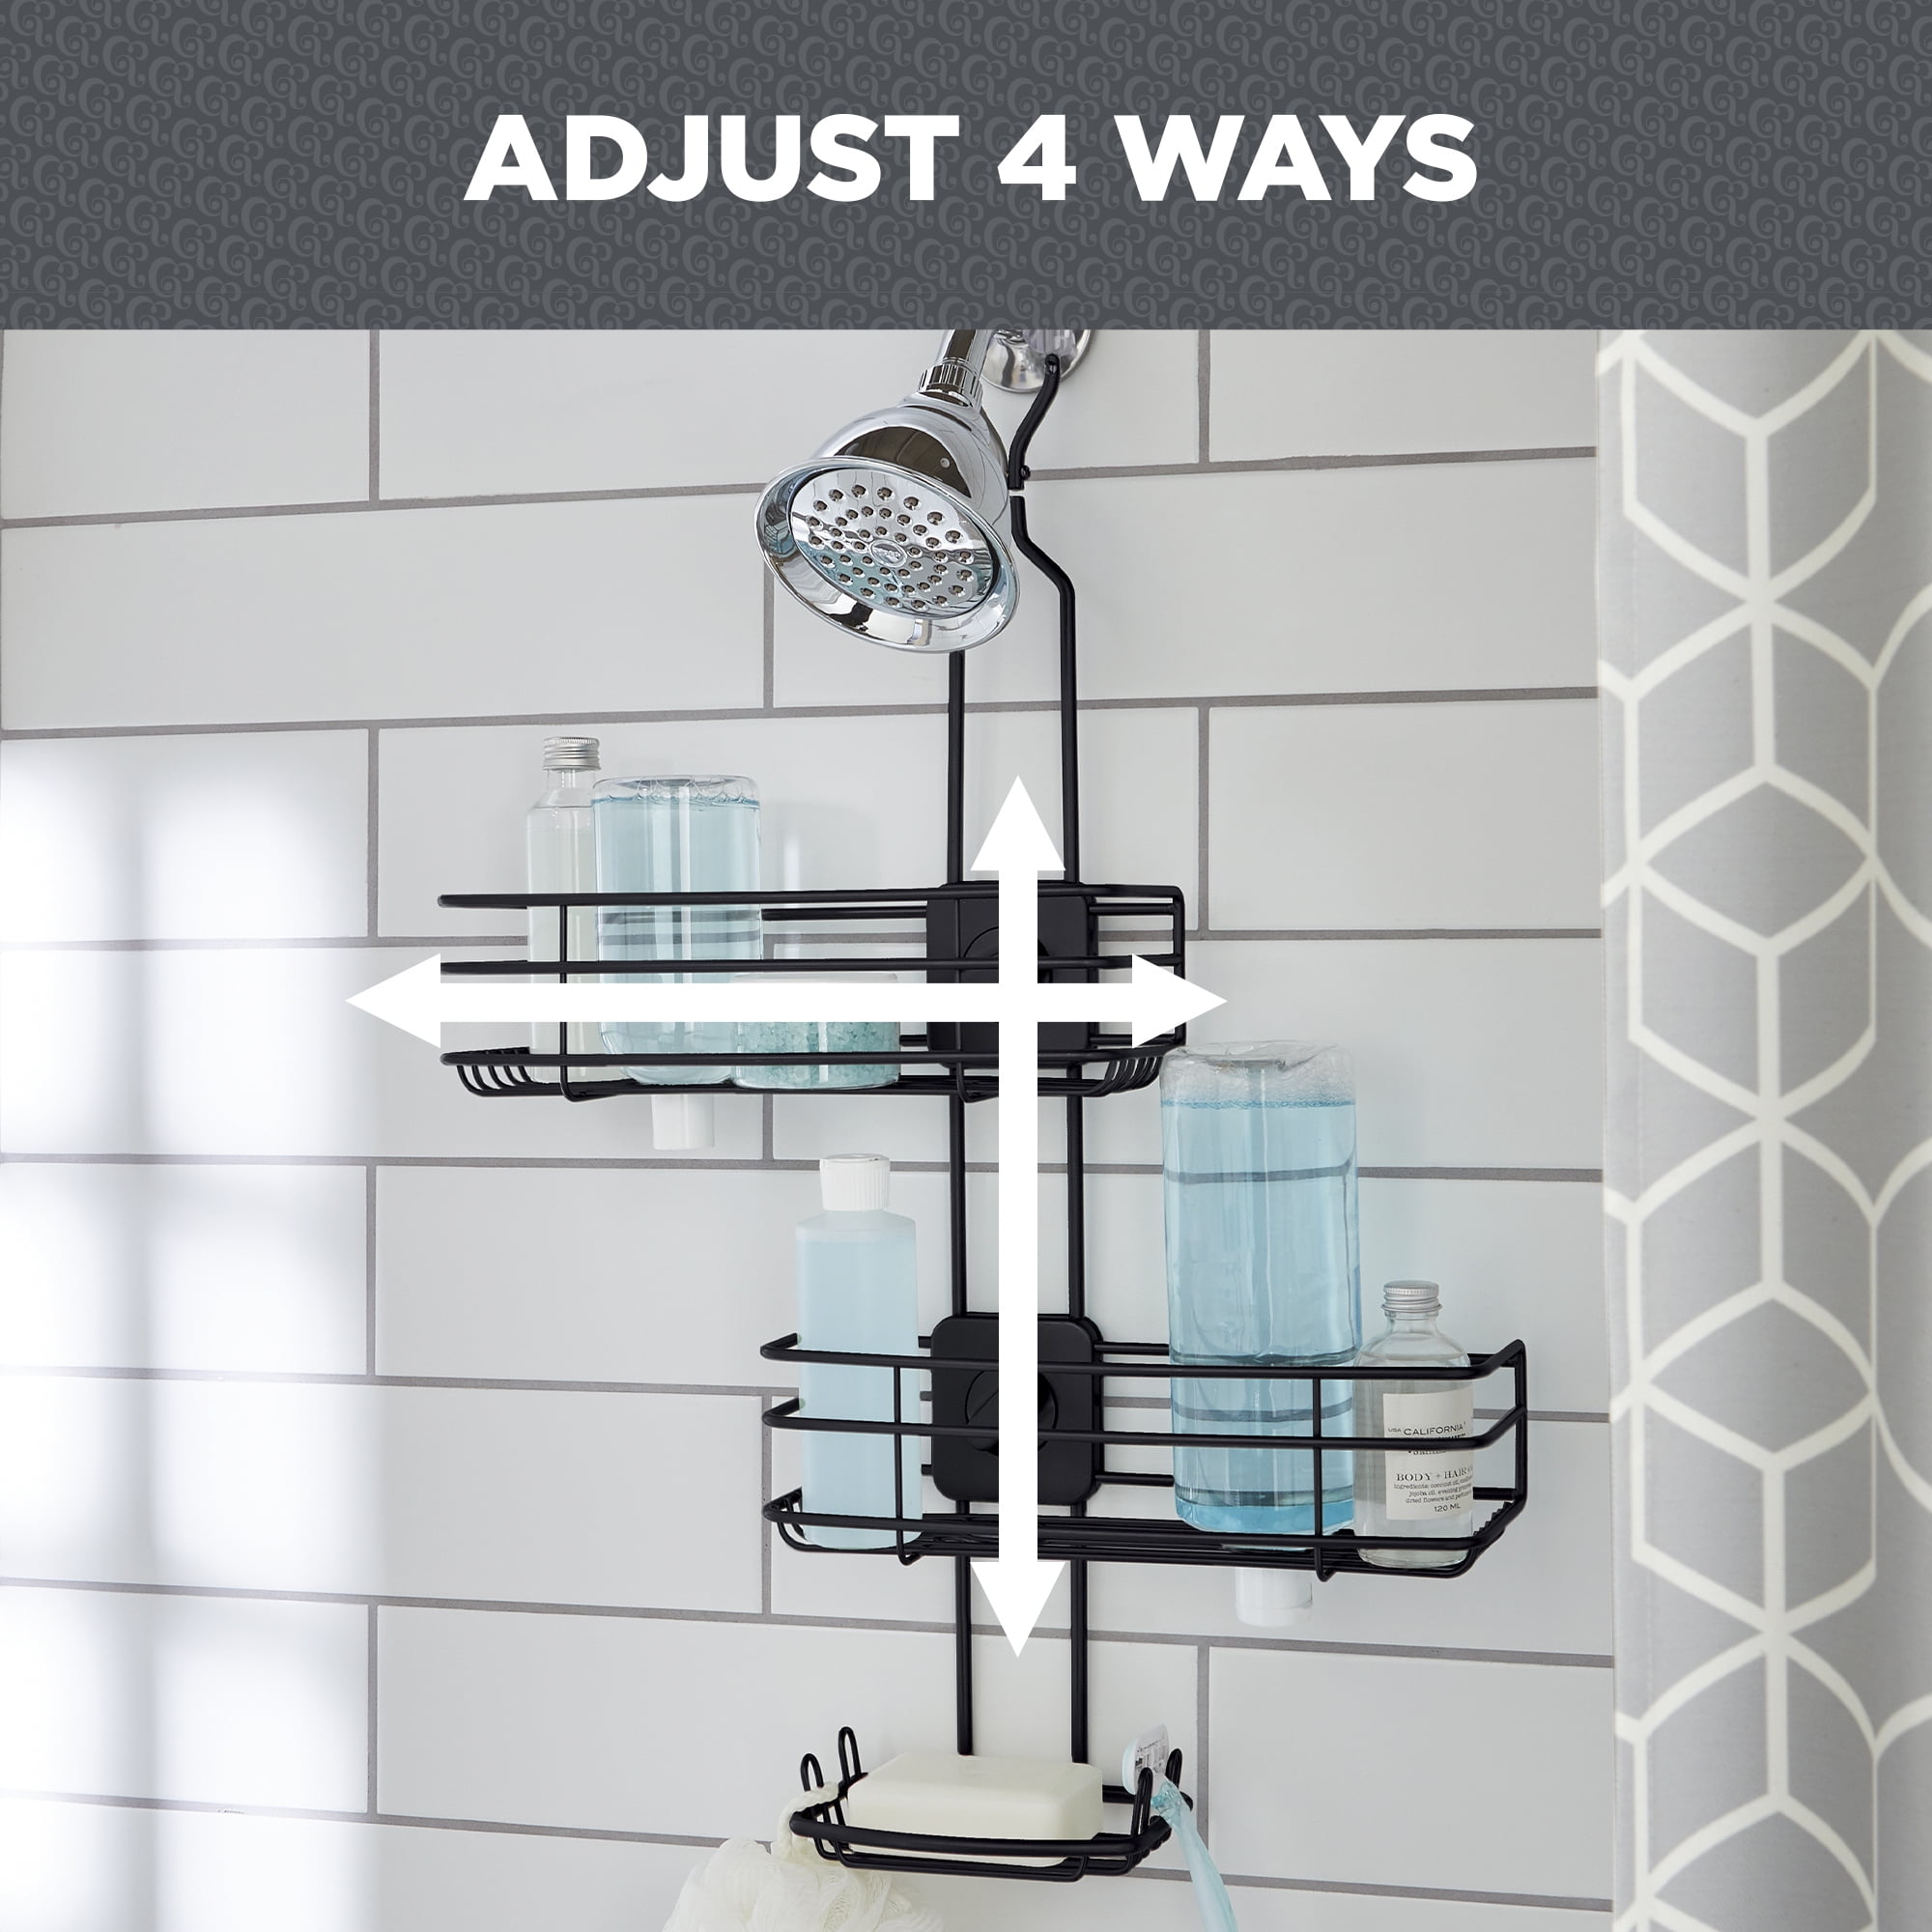 Shower caddy – the necessary equipment in every bathroom